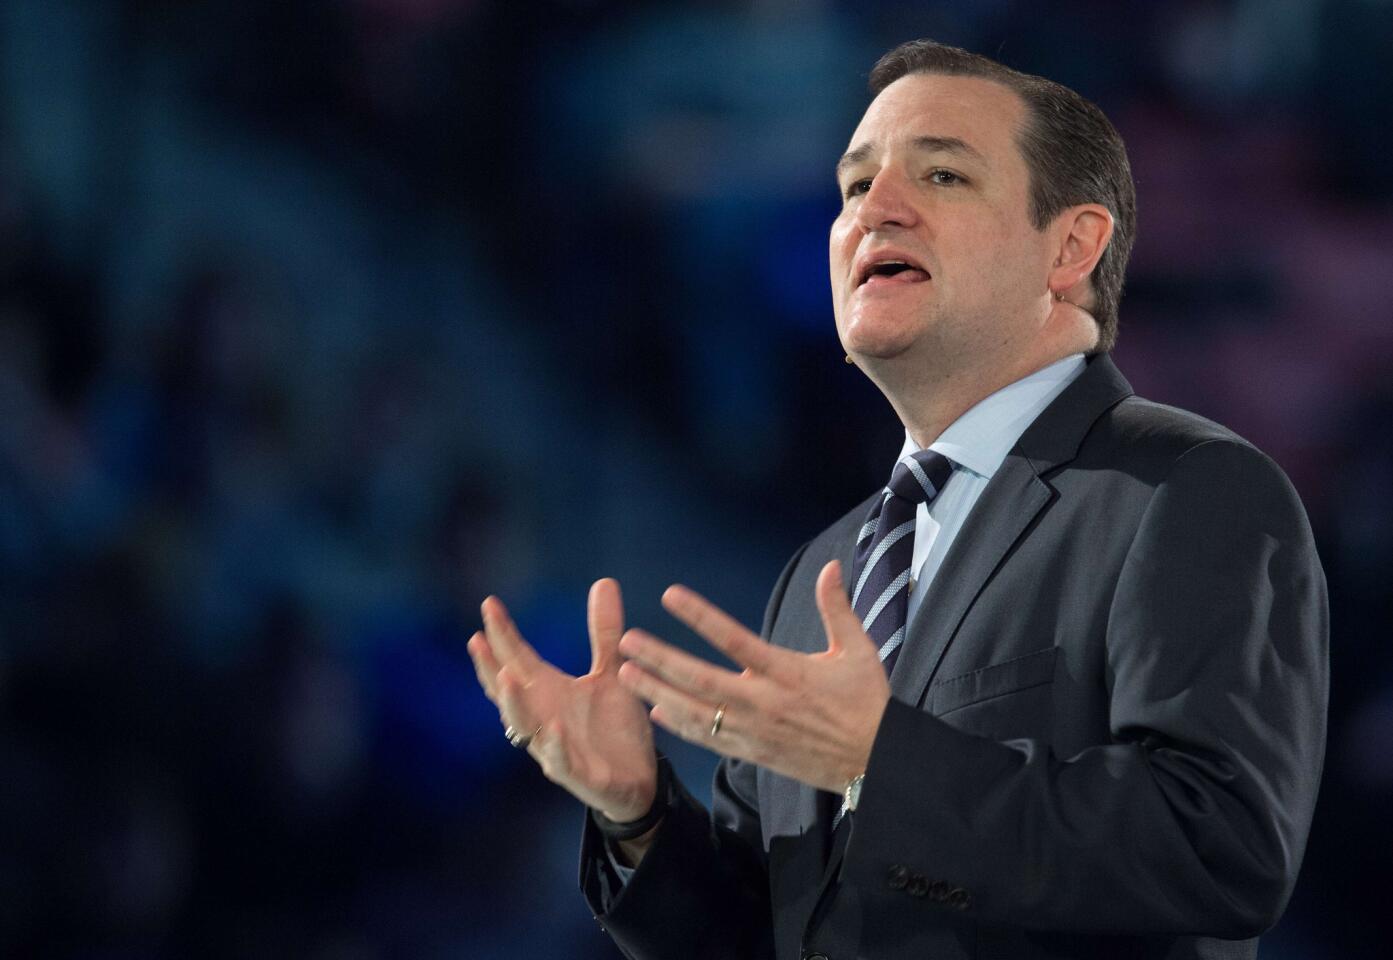 Sen. Ted Cruz, R-Texas, announces his campaign for president March 23, 2015, at Liberty University in Lynchburg, Va.